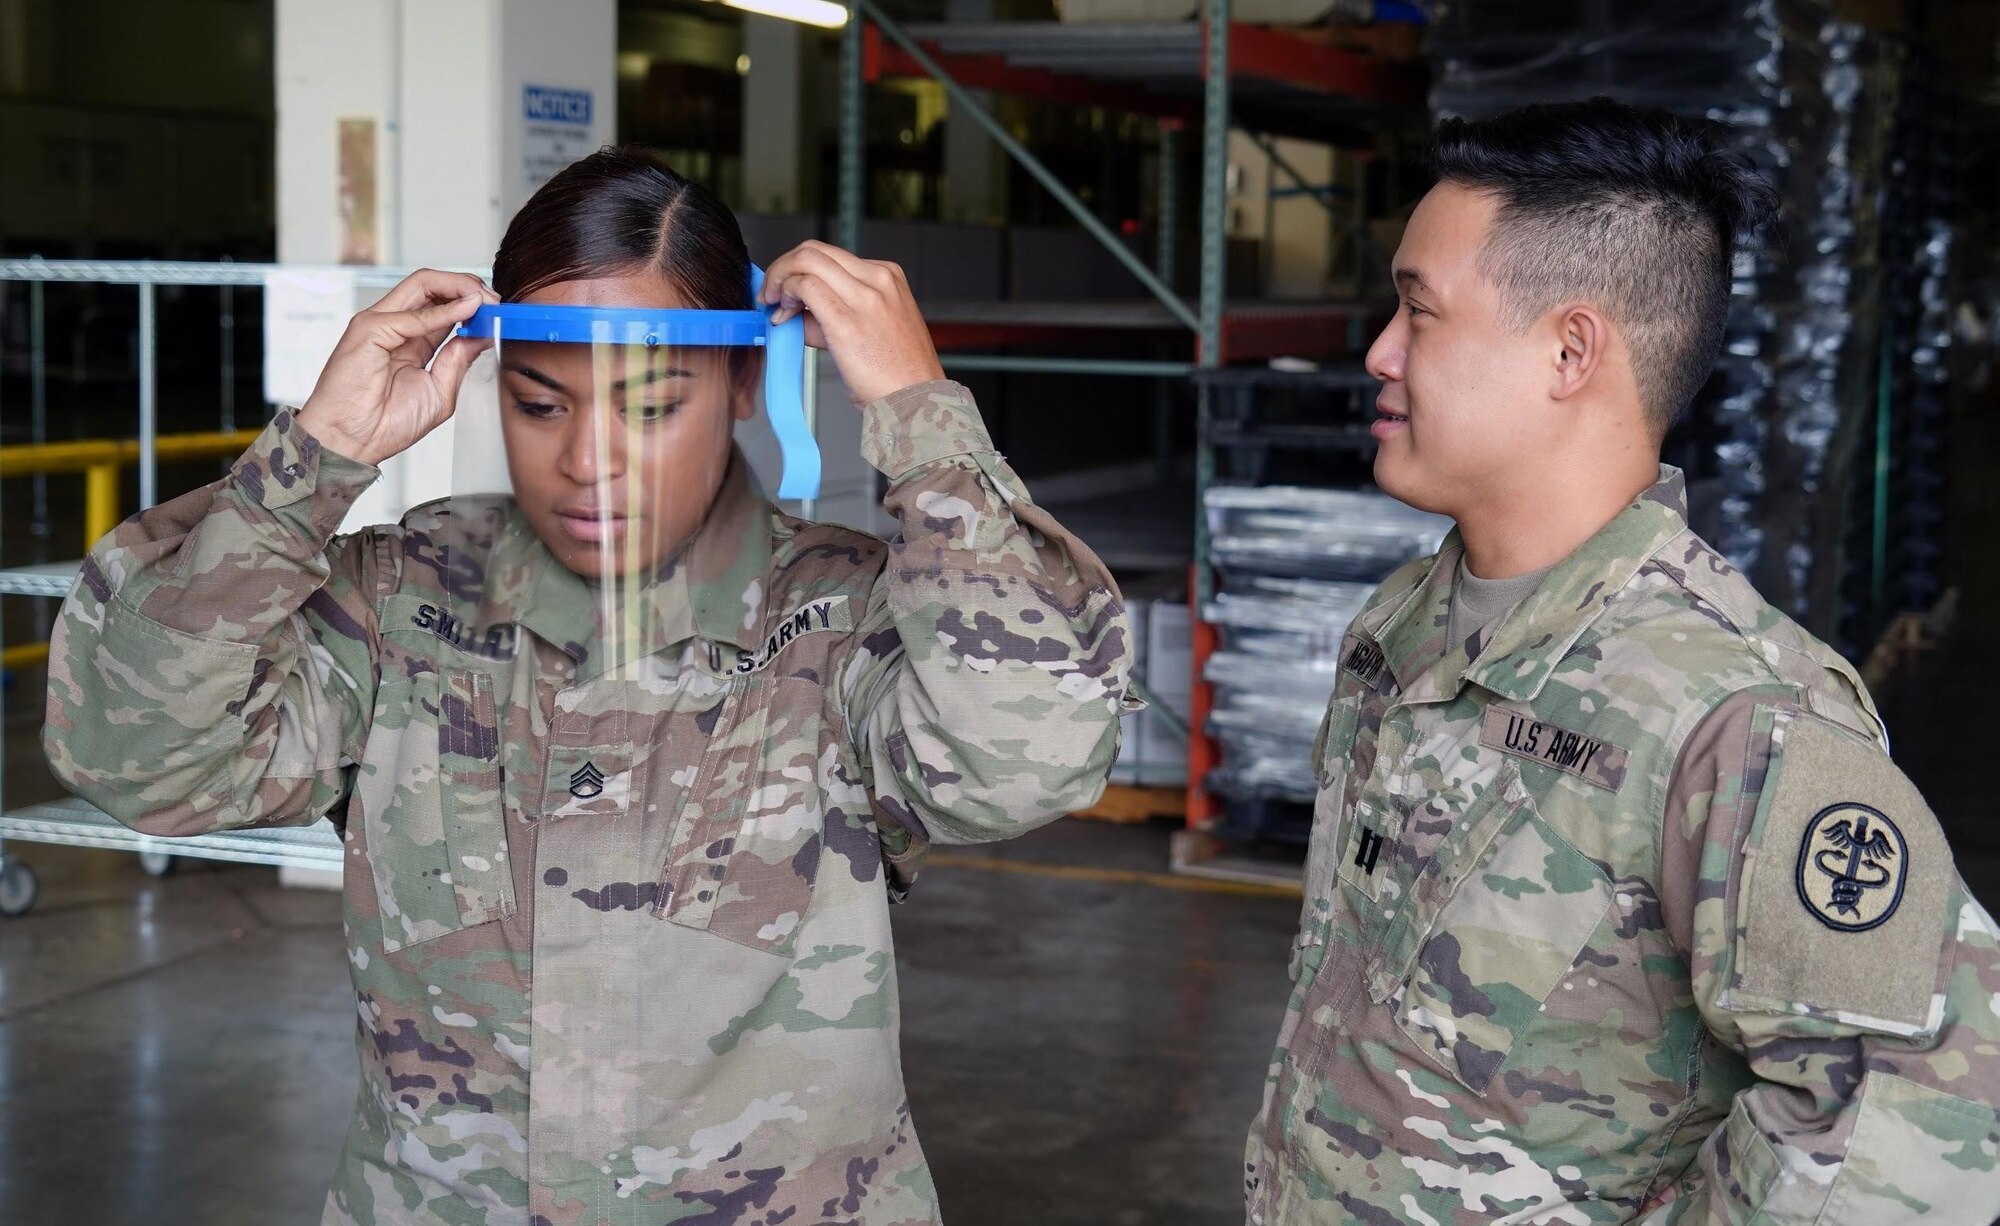 U.S. Army Staff Sgt. Jacklyn Smith, Tripler Army Medical Center medical warehouse non-commissioned officer in charge, receives assistance from U.S. Army Capt. Scott Nguyen, TAMC General Surgery resident physician, with adjusting her face shield at TAMC, Hawaii, April 3, 2020. Due to a shortage of disposable masks, the 15th Wing is using 3D printers to make face shields to donate across the island to combat the COVID-19 pandemic.  (U.S. Air Force photo by Airman 1st Class Erin Baxter)